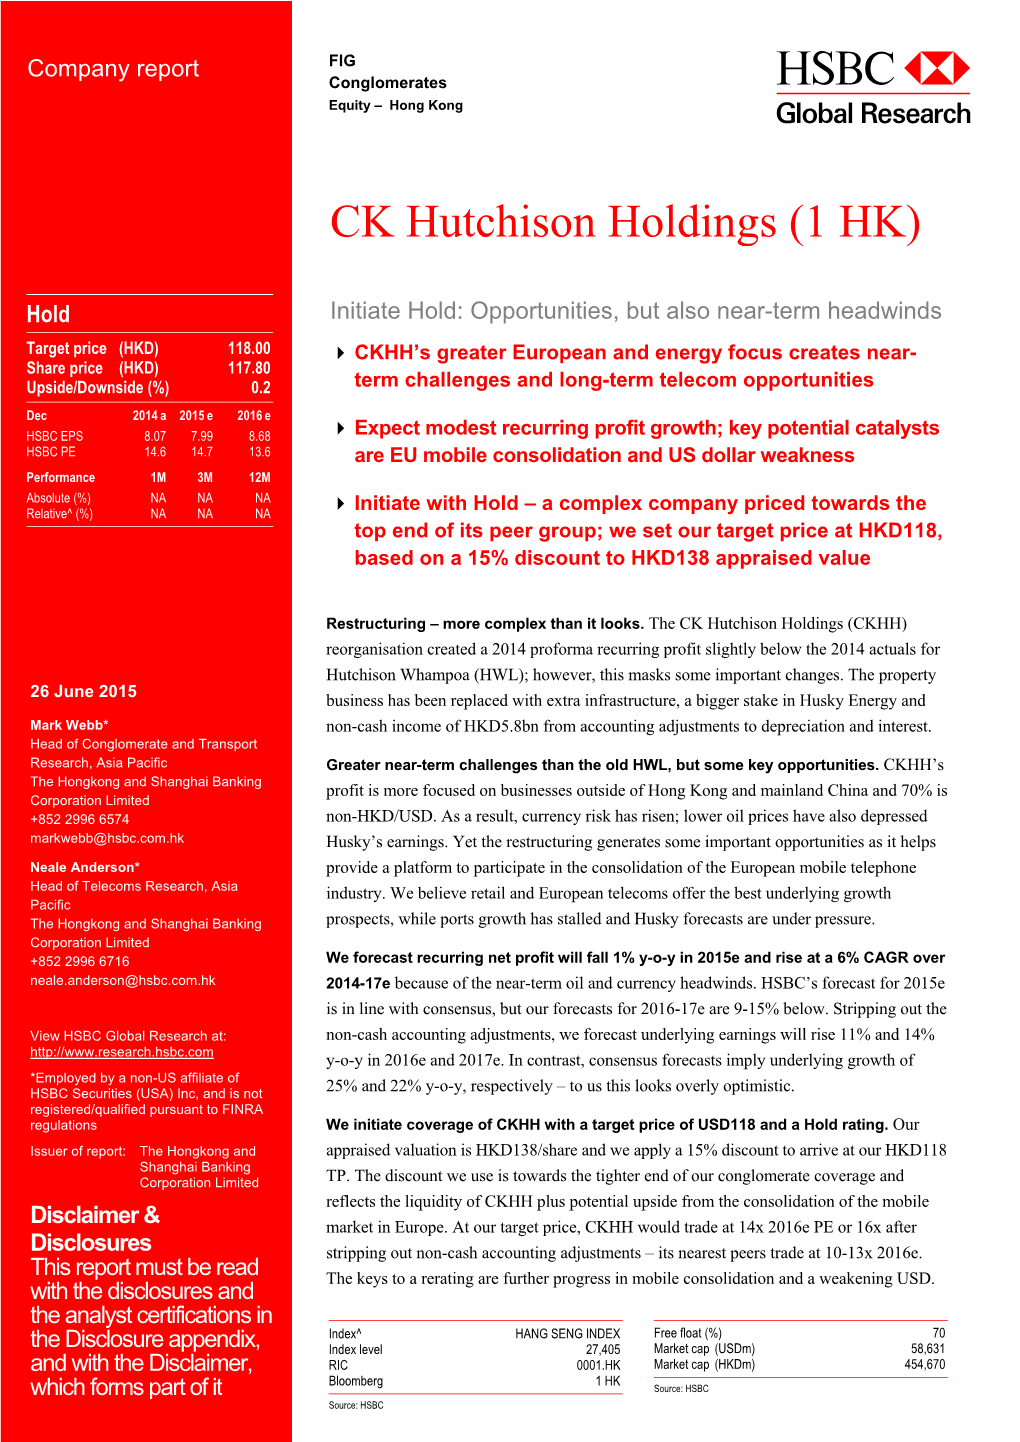 CK Hutchison Holdings (1 HK)-Initiate Hold: Opportunities, but Also Near-Term Headwinds